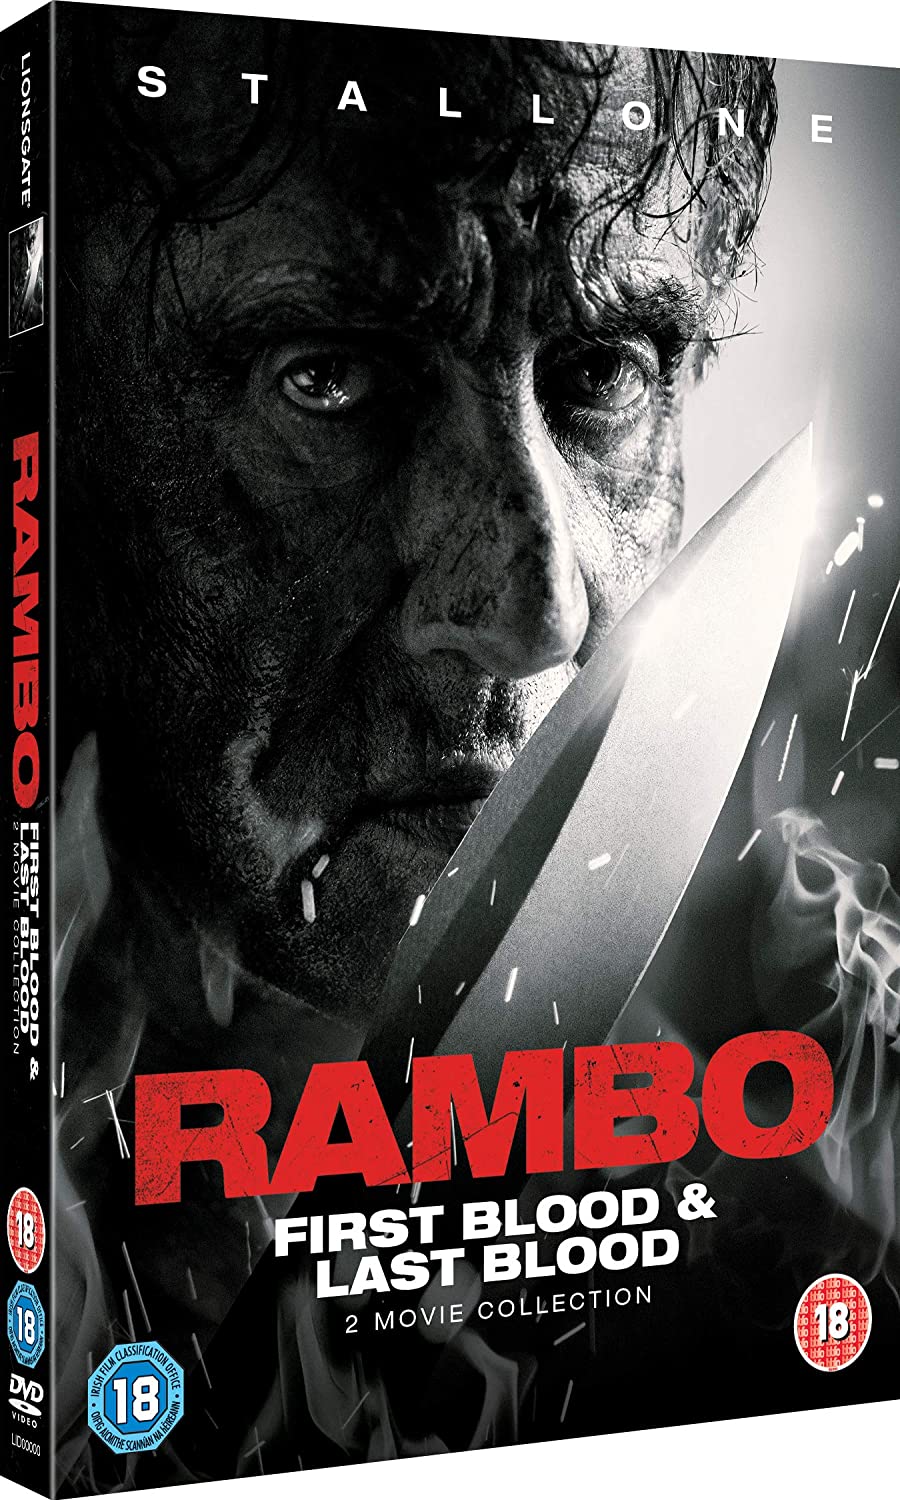 Rambo: First Blood & Last Blood - Action [DVD]